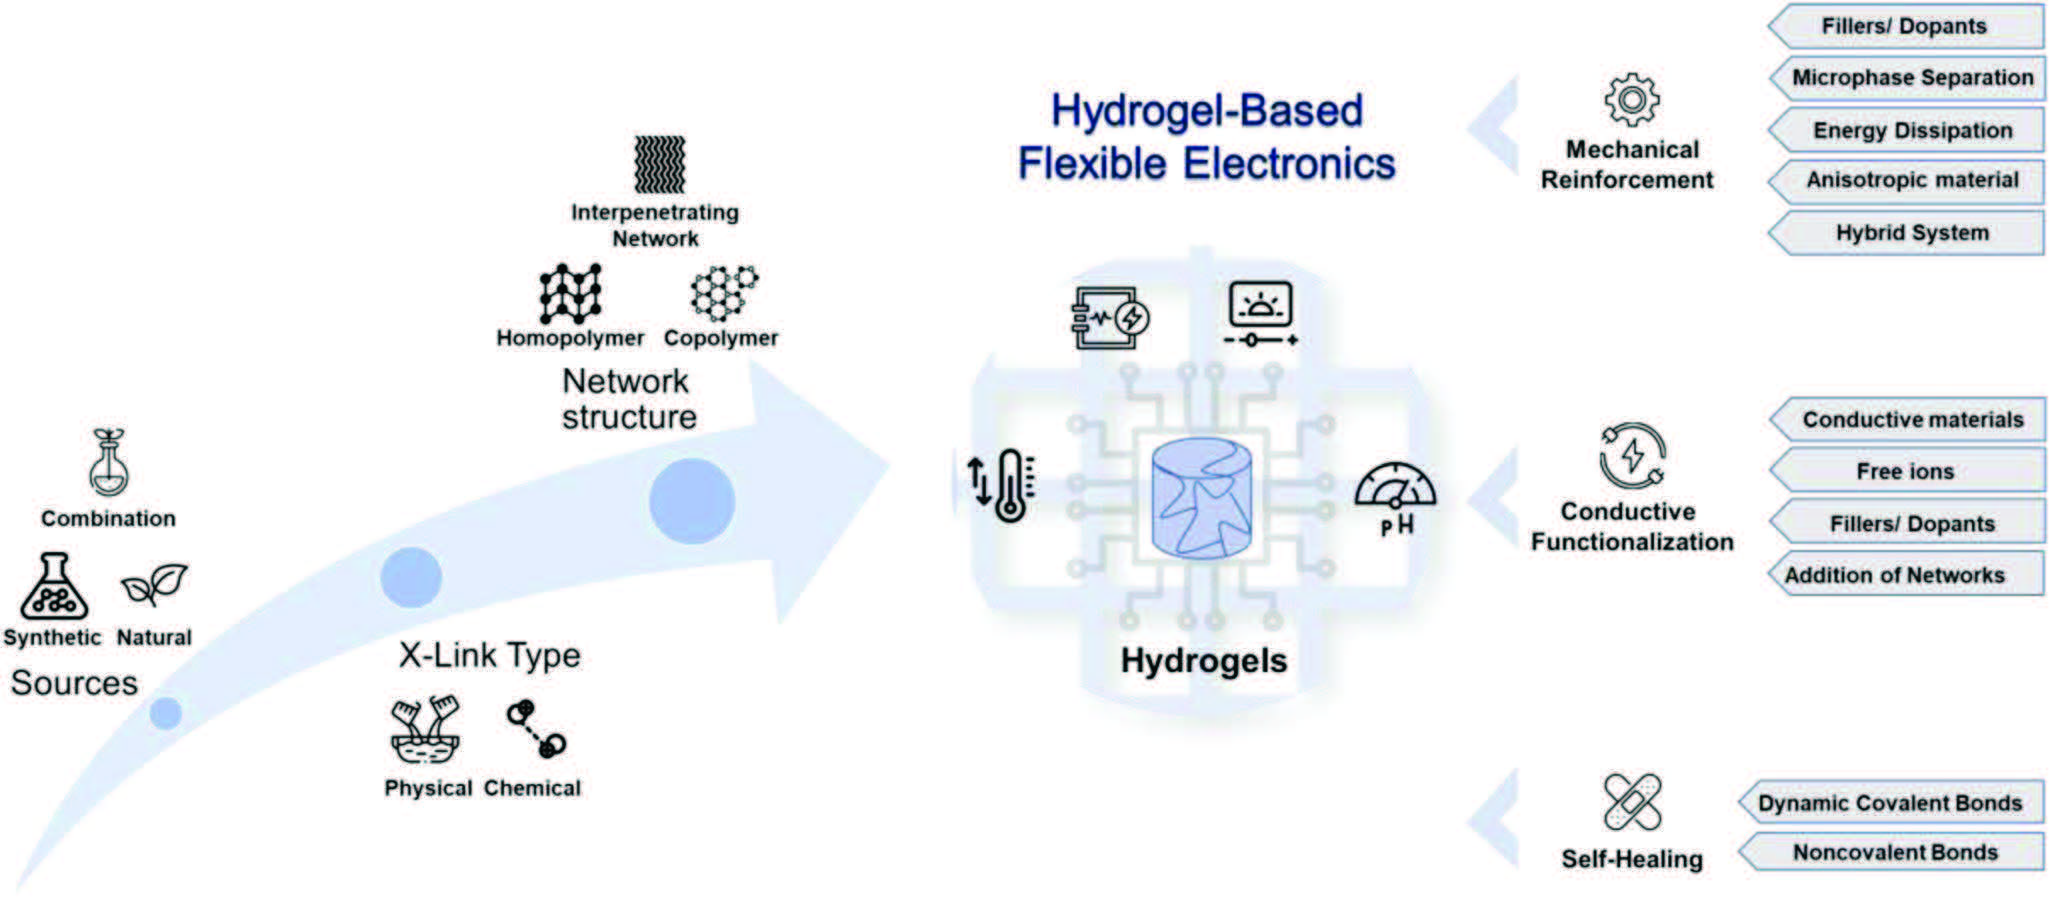 Overview of hydrogels and approaches to boost their functions for hydrogel-based flexible electronics